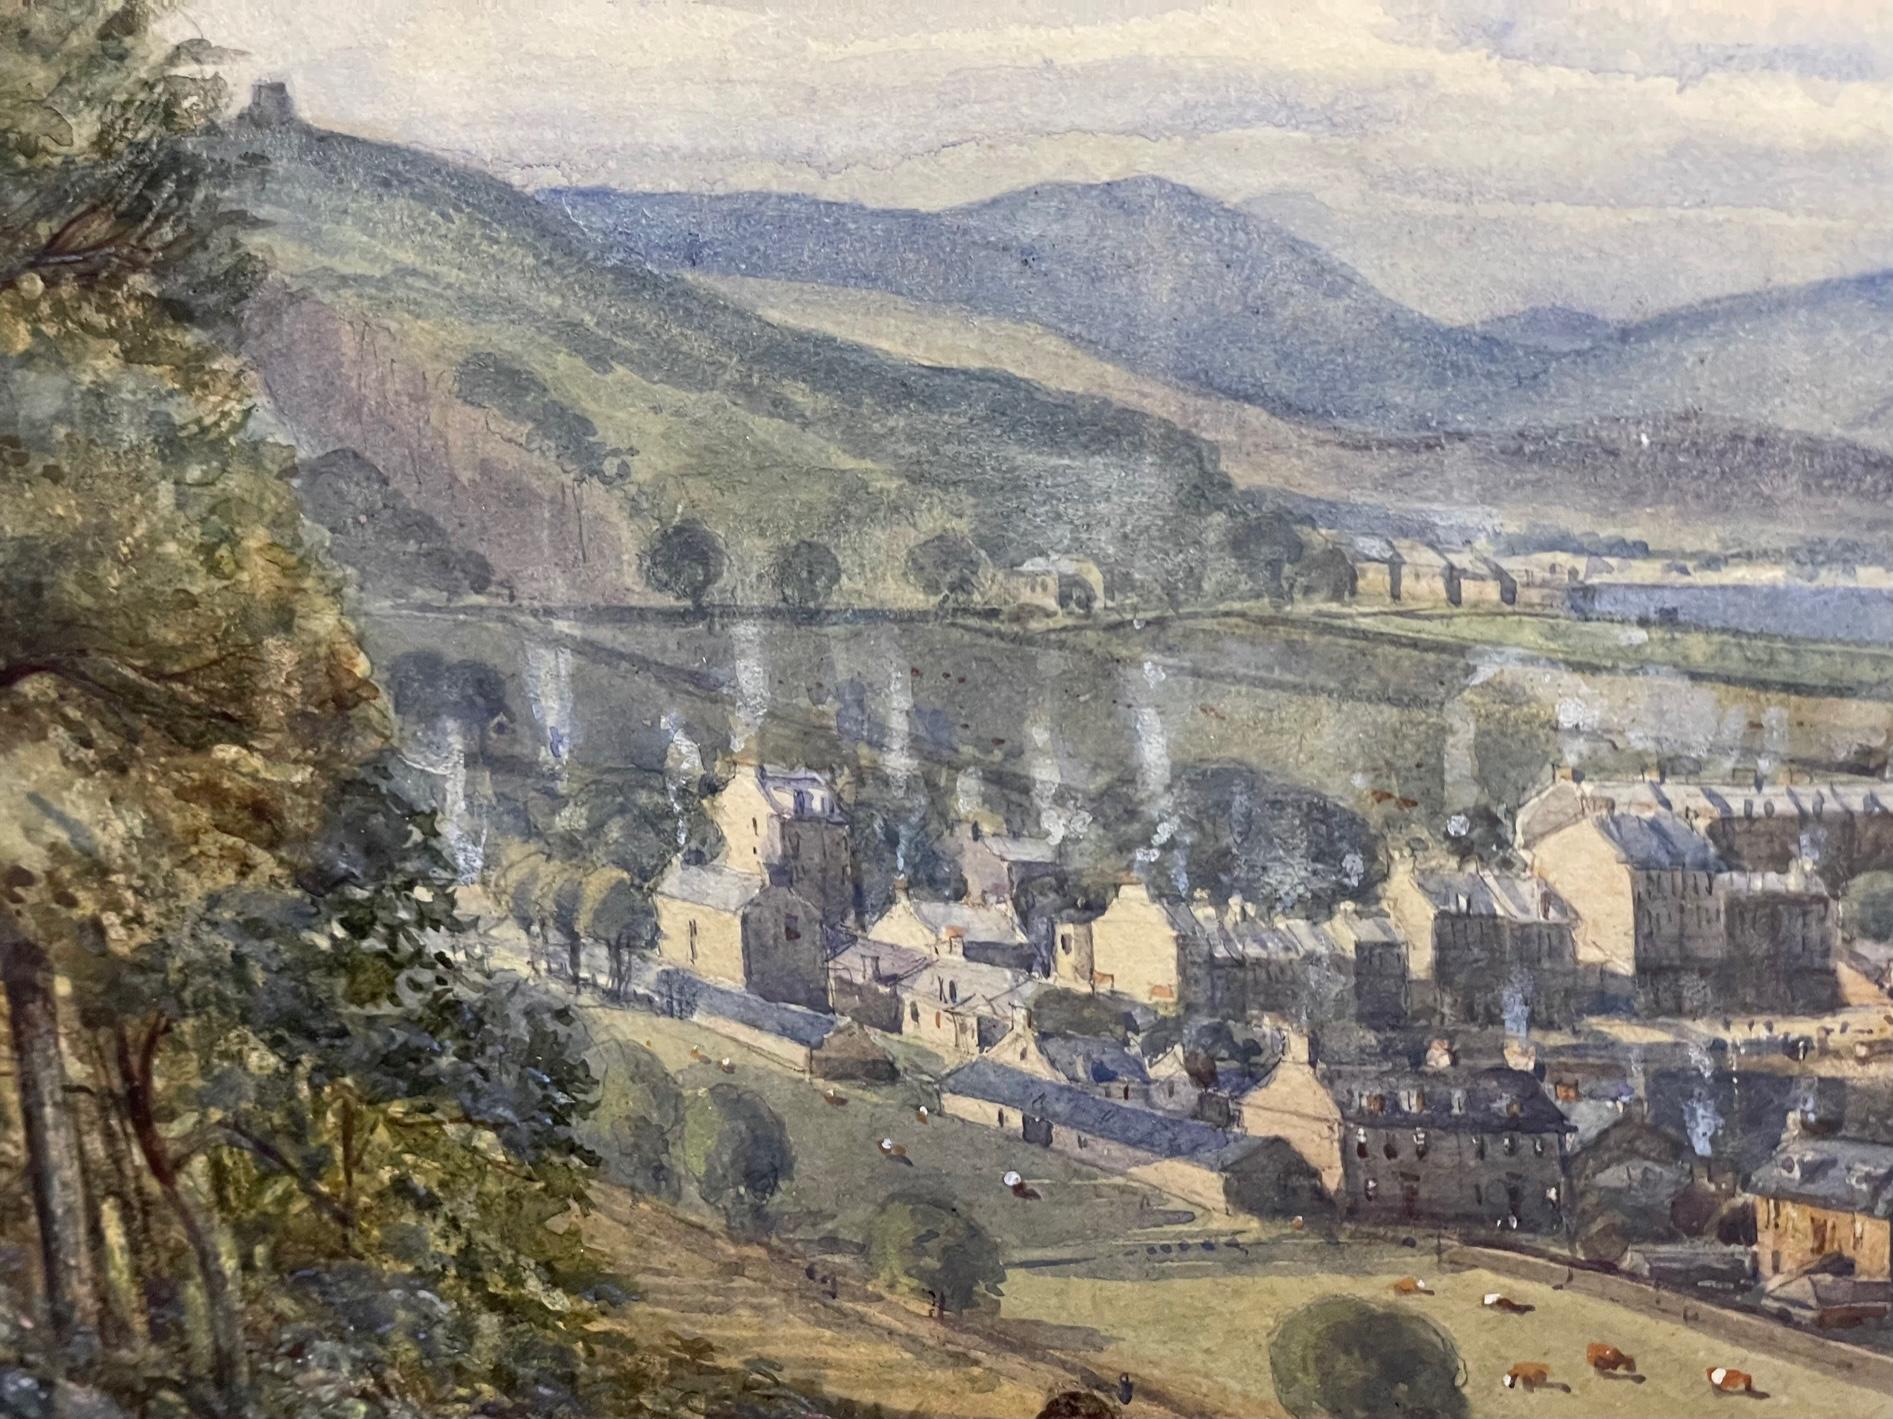 Fine and fresh Town view toward Dunoon, Scotland and harbor by Patrick Downie (1854-1945), a 19th century/20th century Scottish artist known for seascape and coastal paintings.  Much of Downie's work is in oil paint, but this one is a freshly